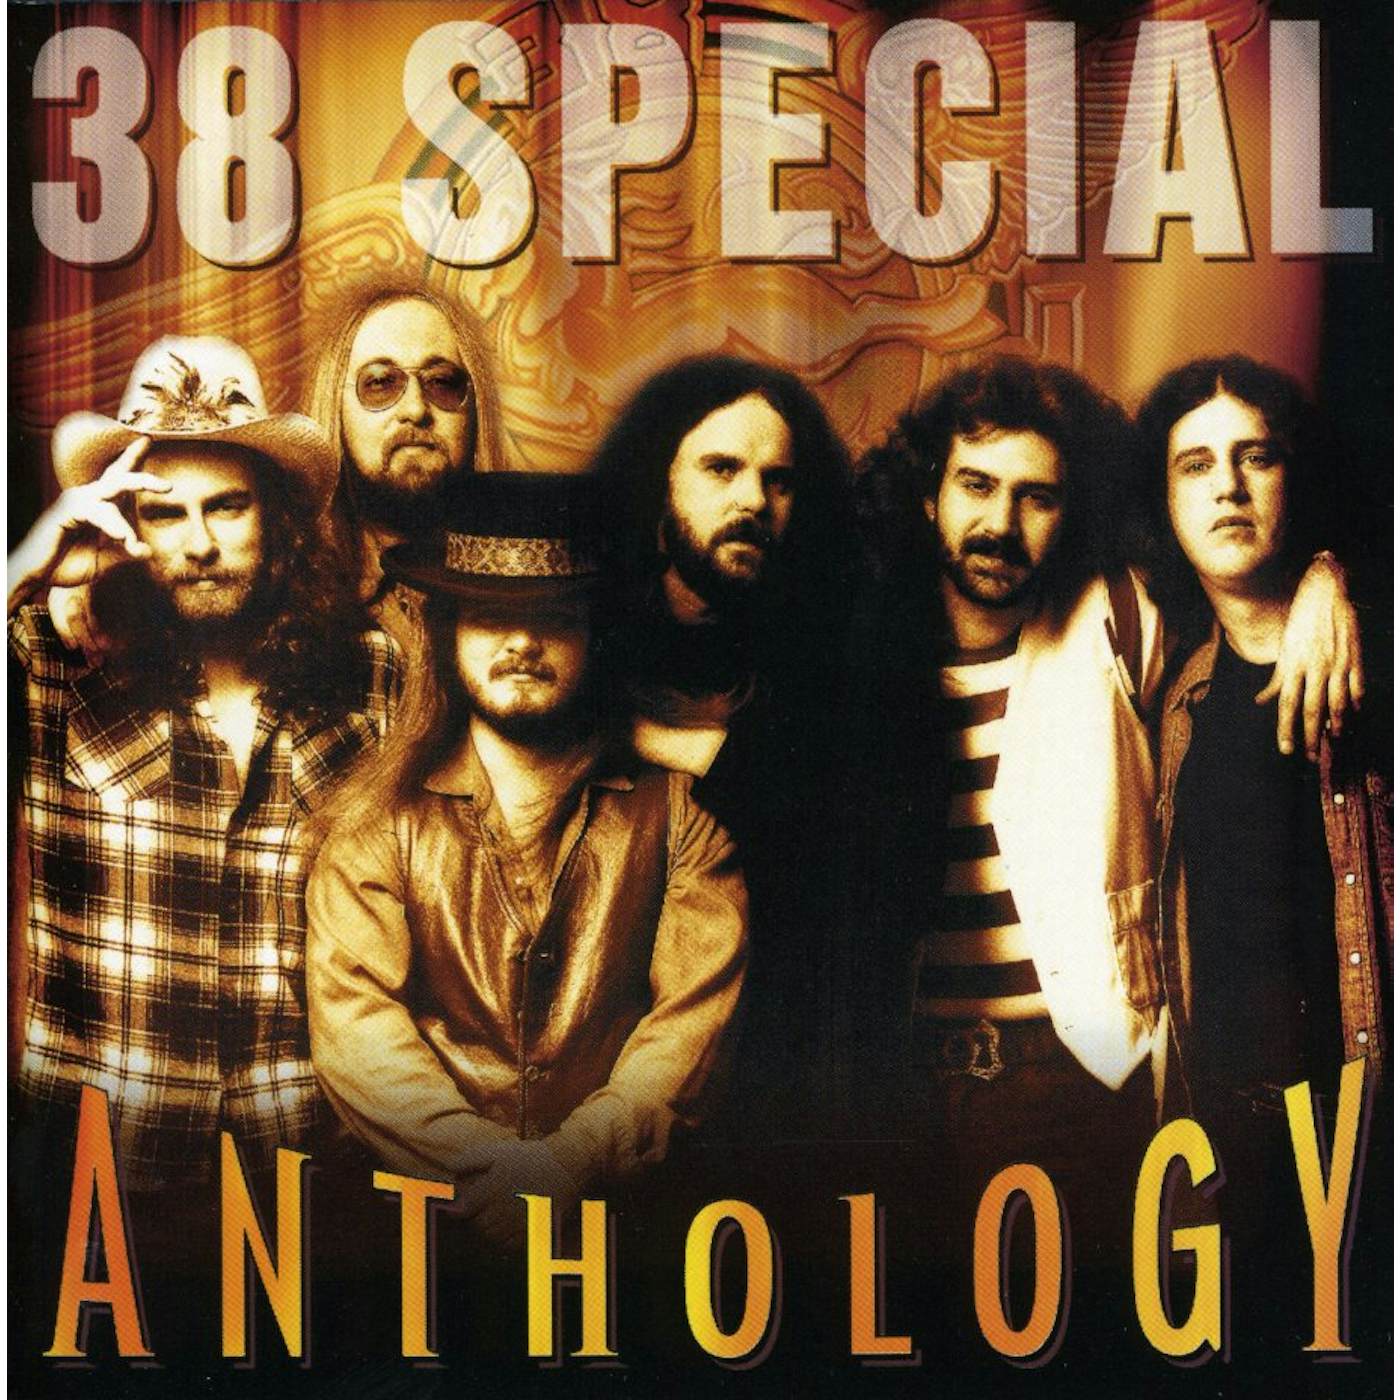 38 Special ANTHOLOGY CD